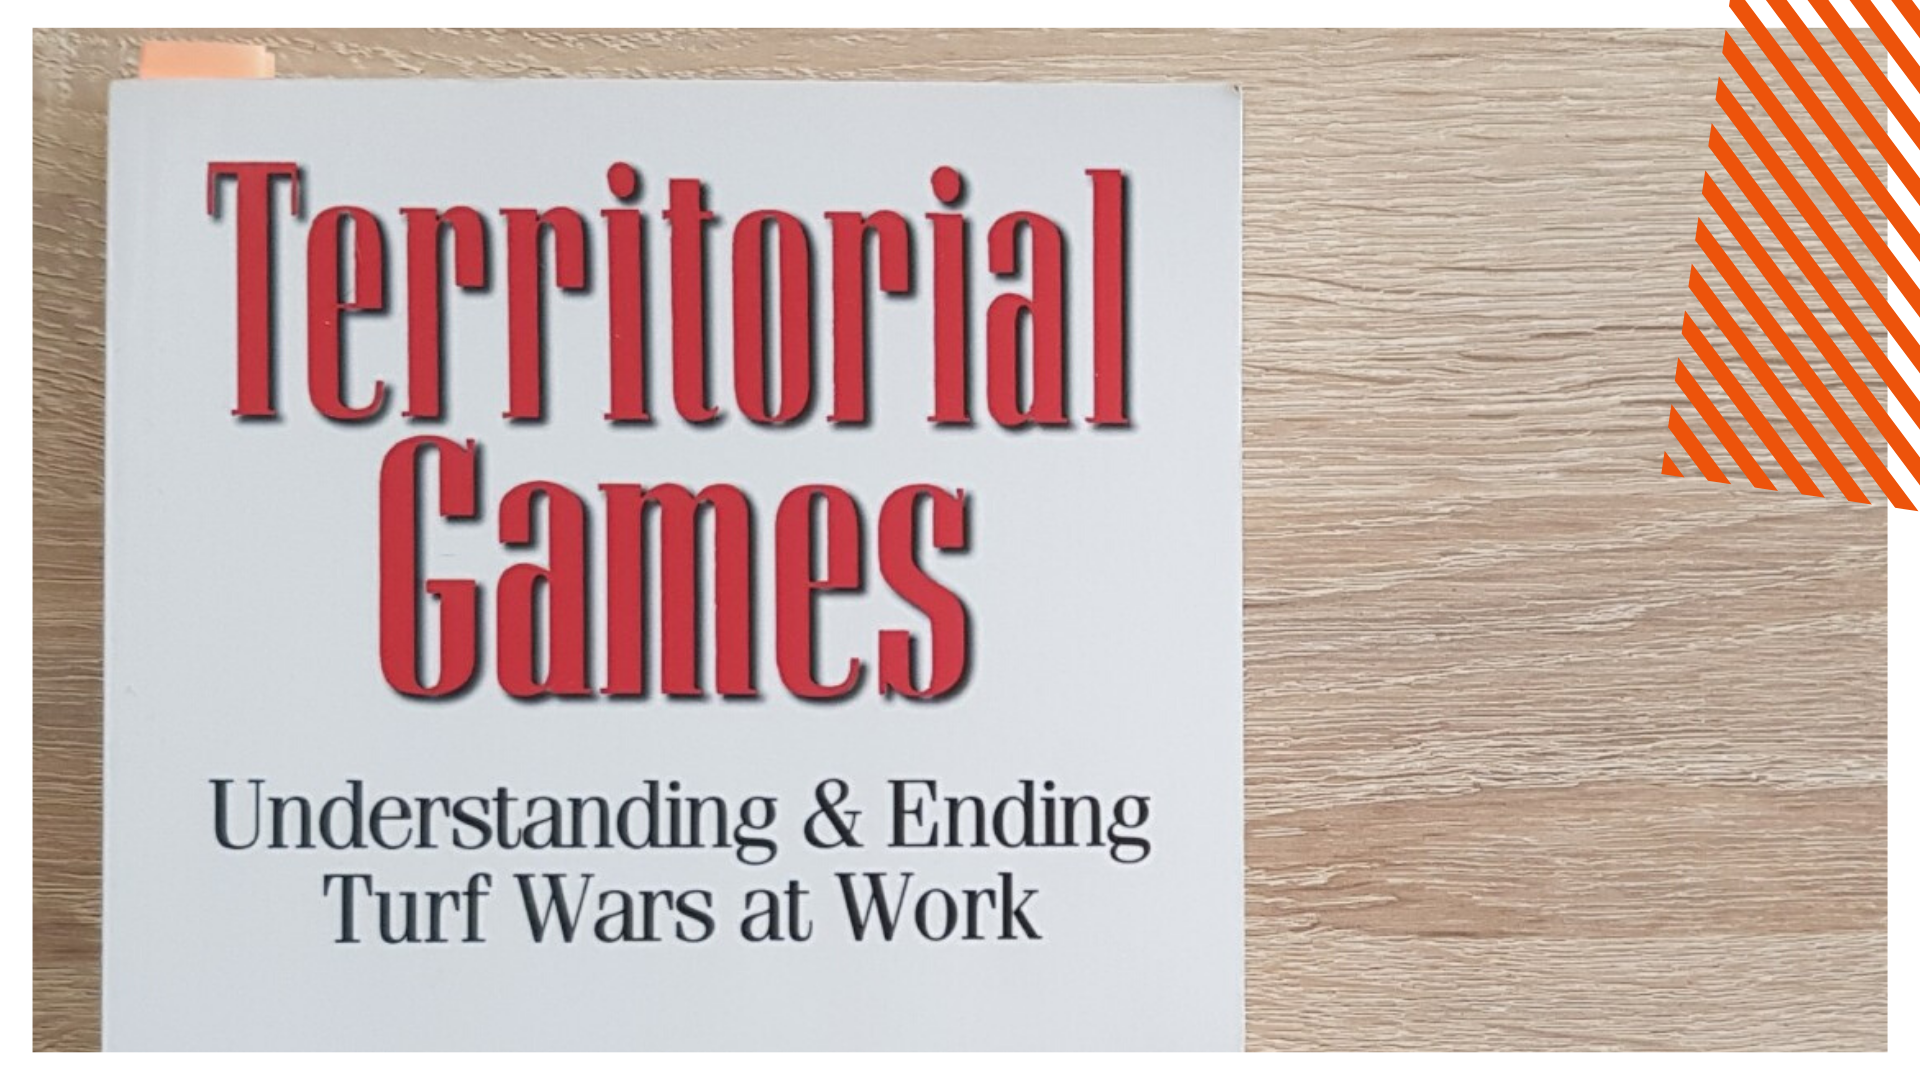 #2 Annette Simmons – Territorial Games